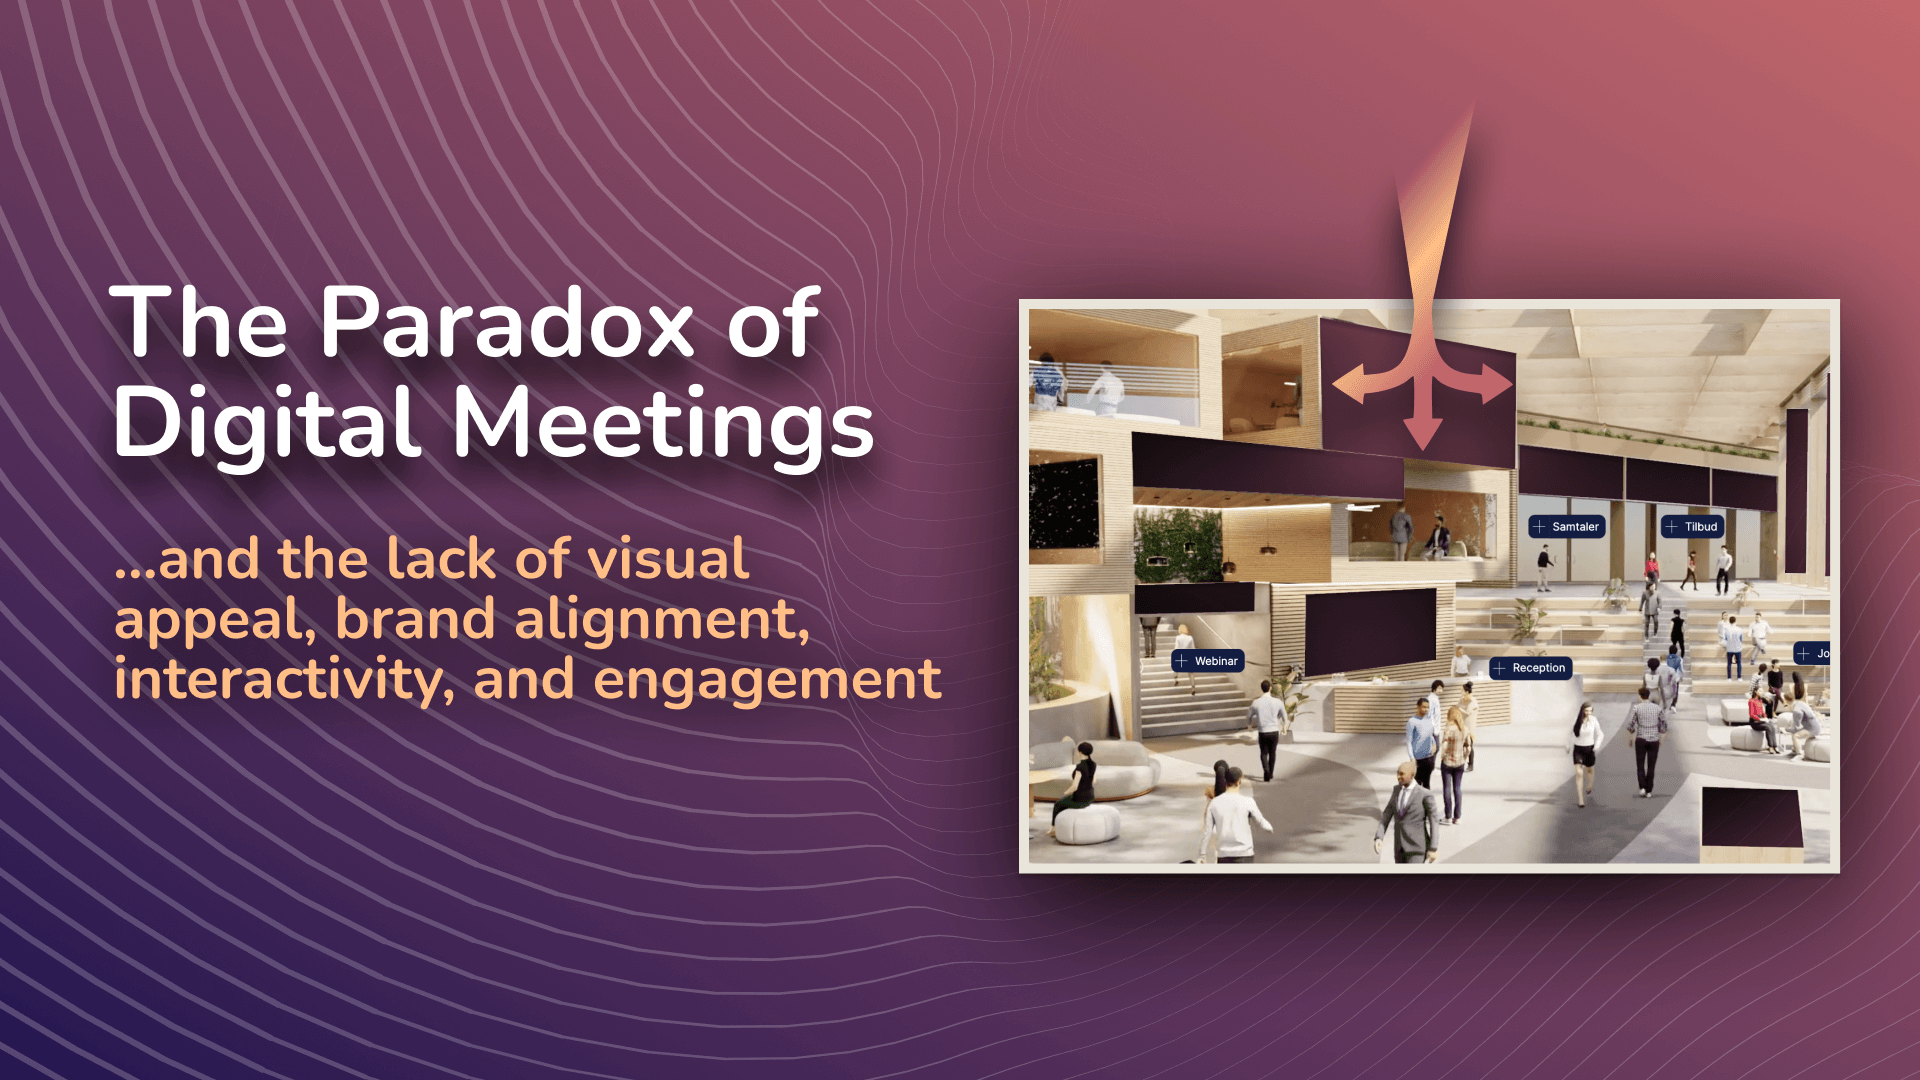 Digital meetings fall short in both visual appeal, interactivity, and engagement, suffering from one-way formats that hinder insightful data gathering